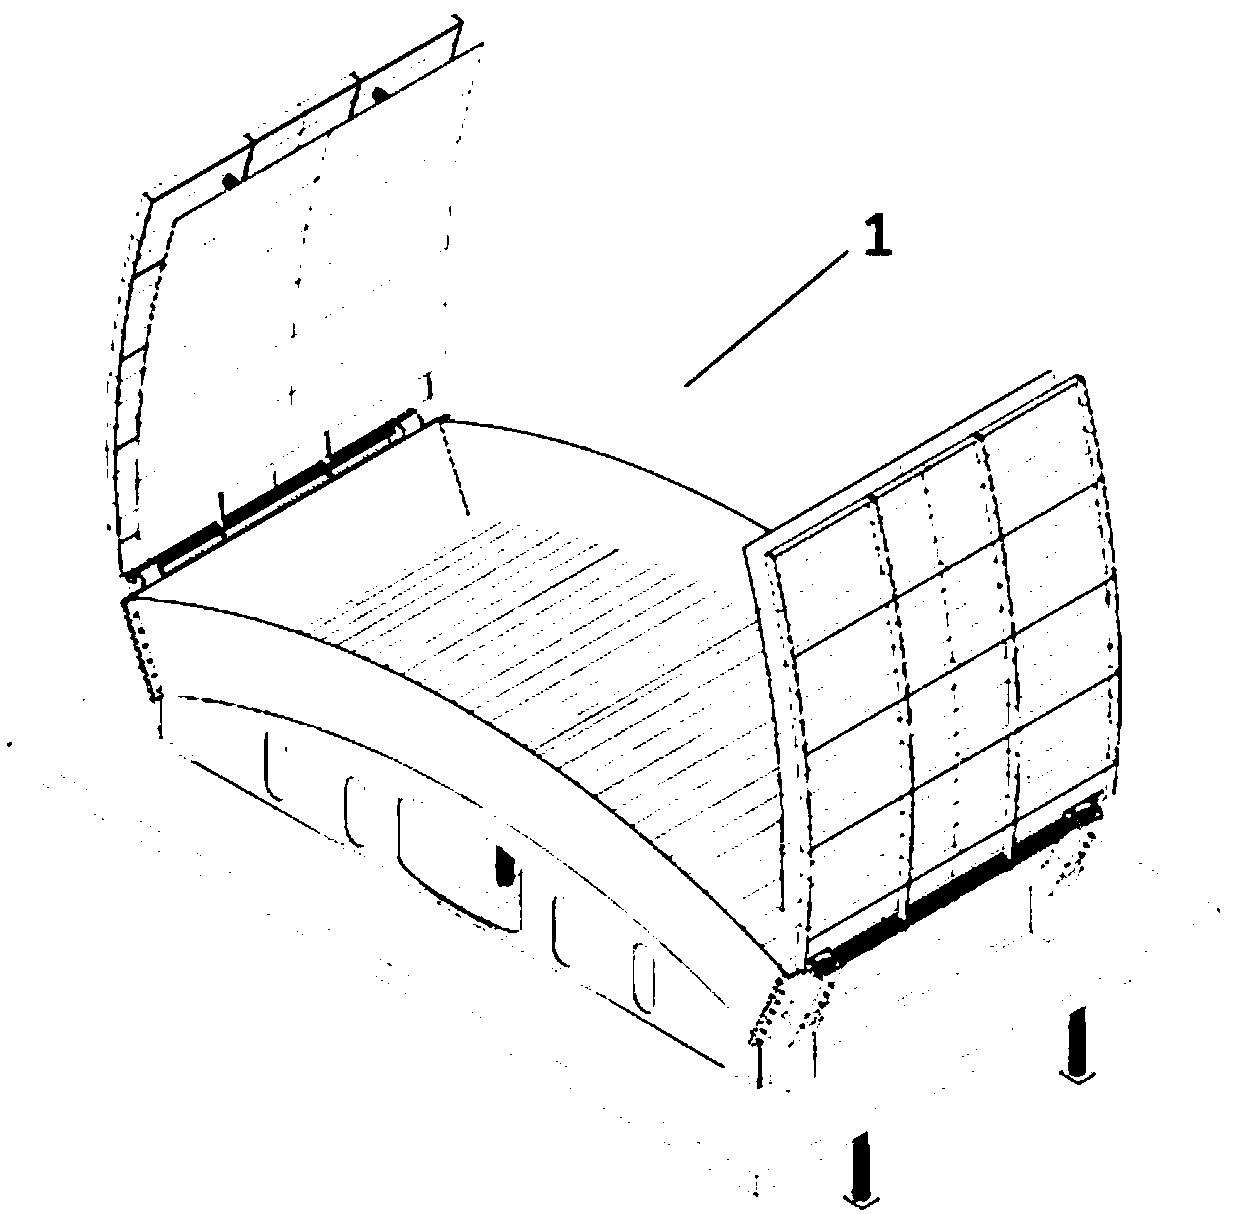 Operating diseased tunnel fabricated treatment construction method